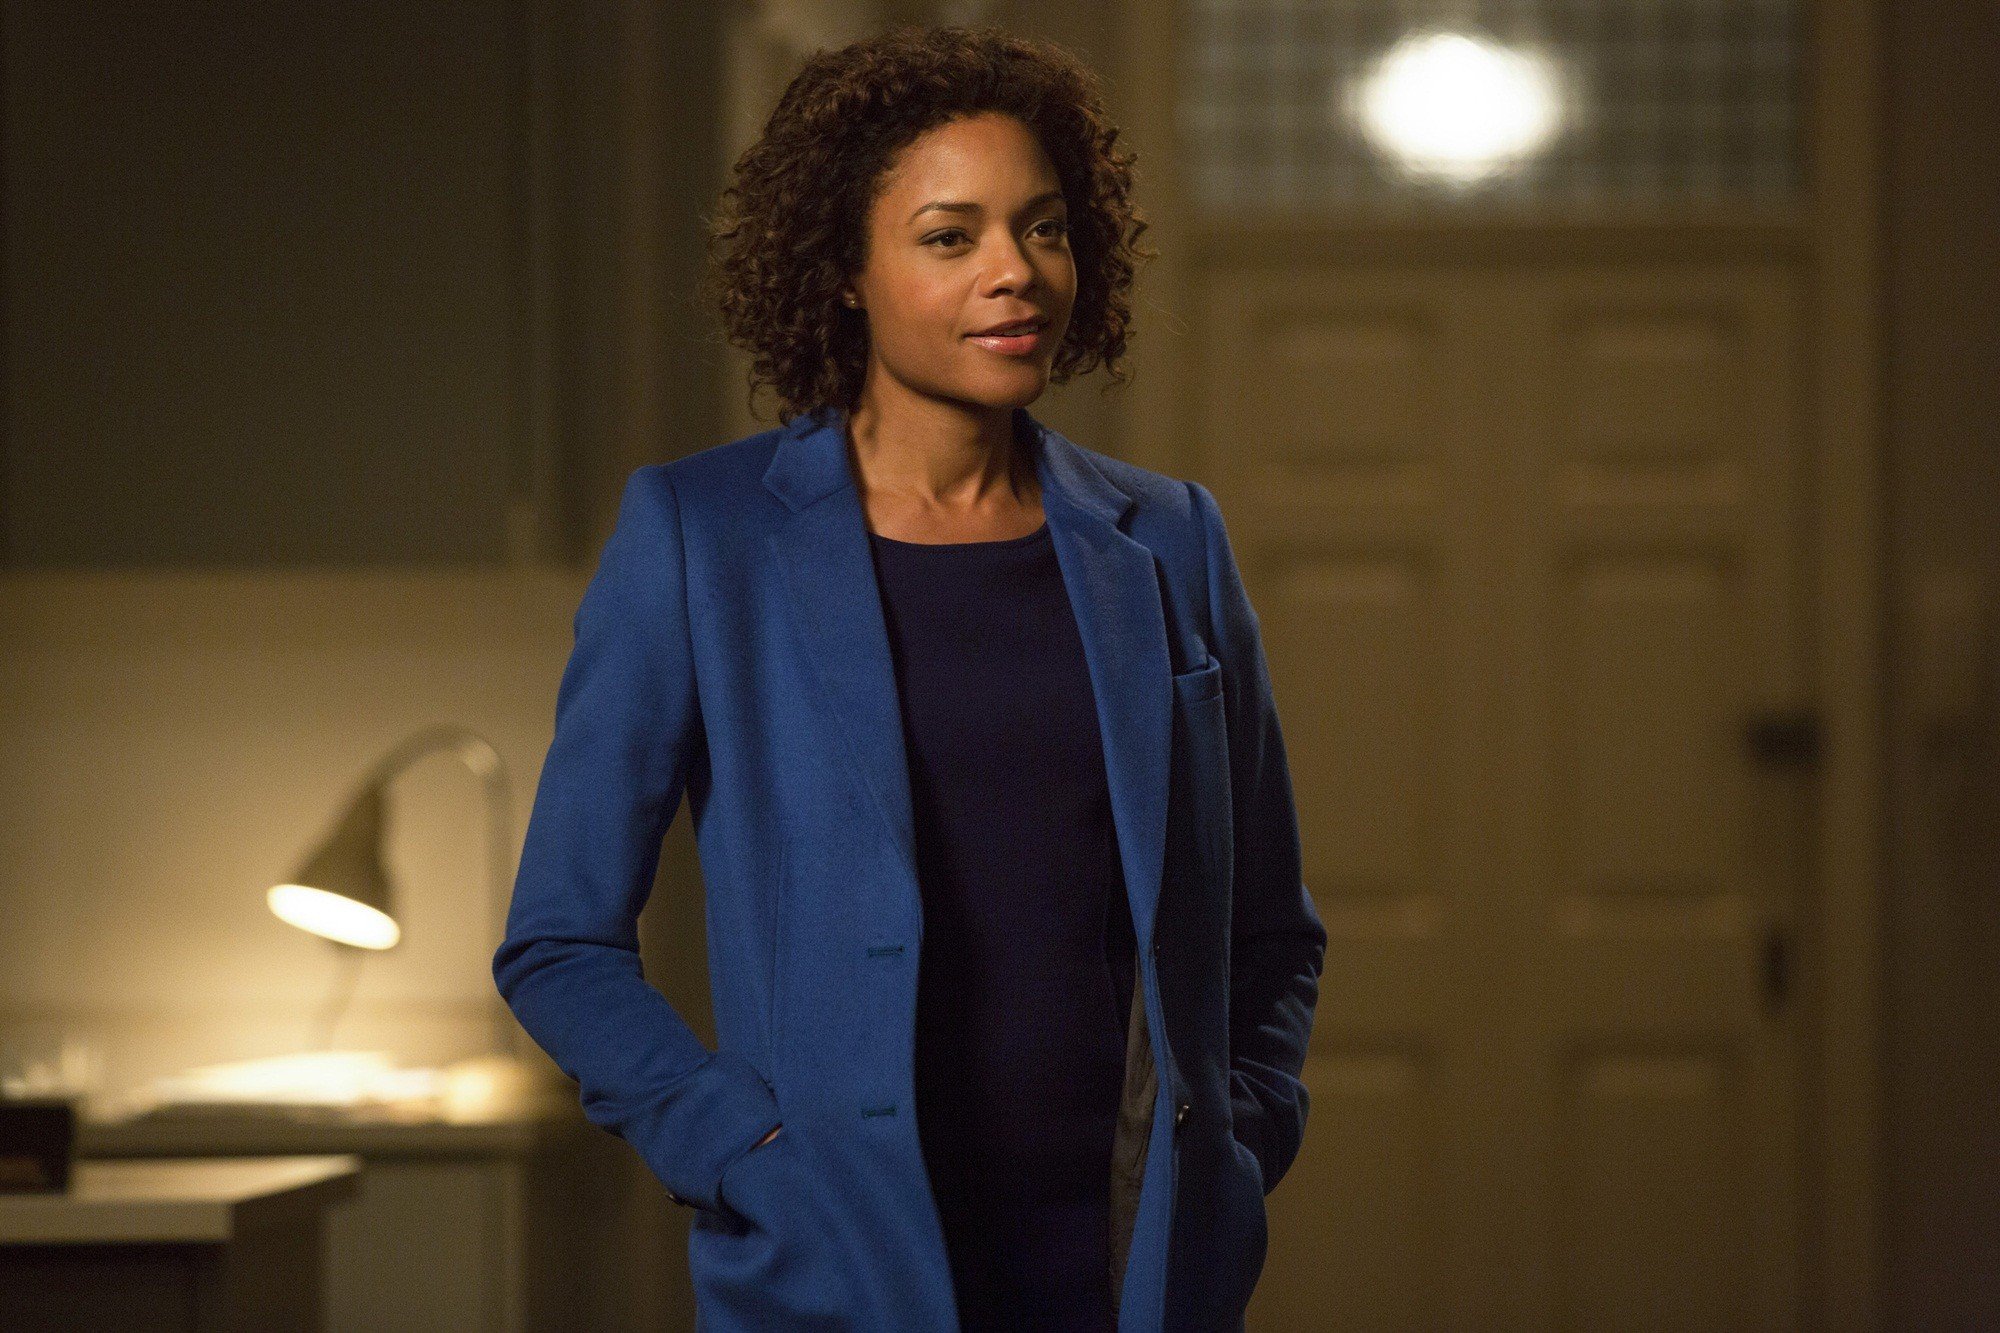 Naomie Harris stars as Eve Moneypenny in Sony Pictures' Spectre (2015)